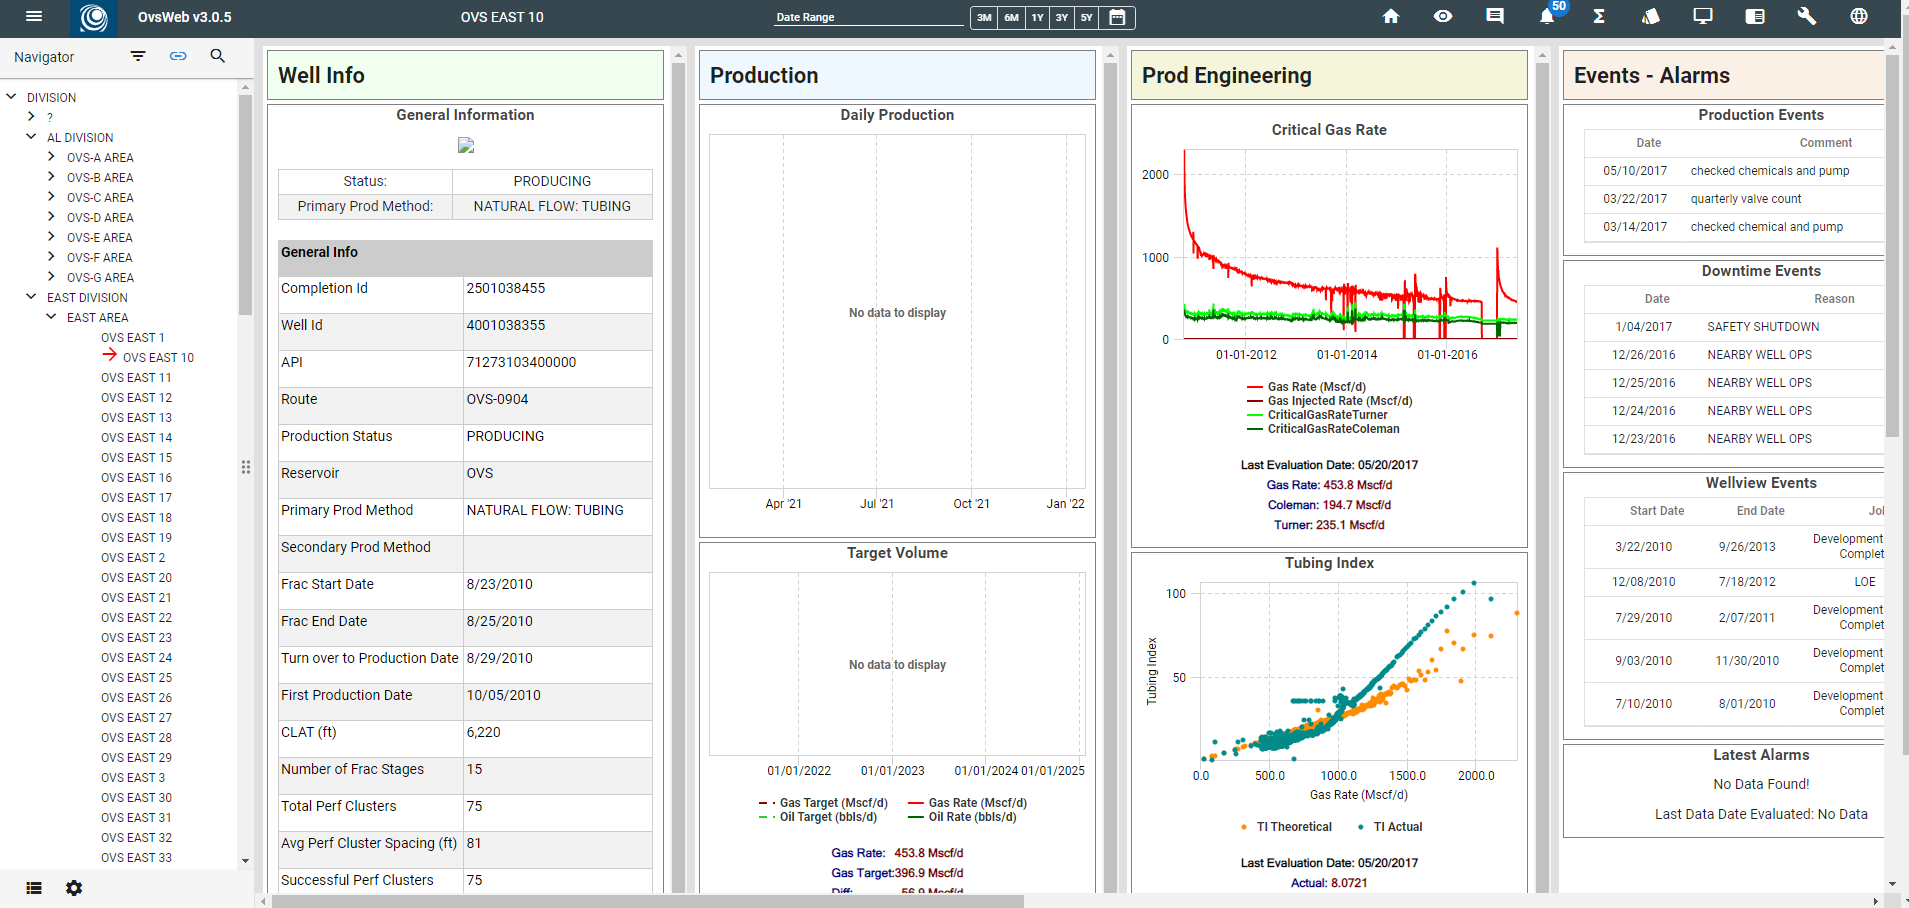 Production Overview Screen with data from historians, forecasts, reserves, maintenance systems, and others.